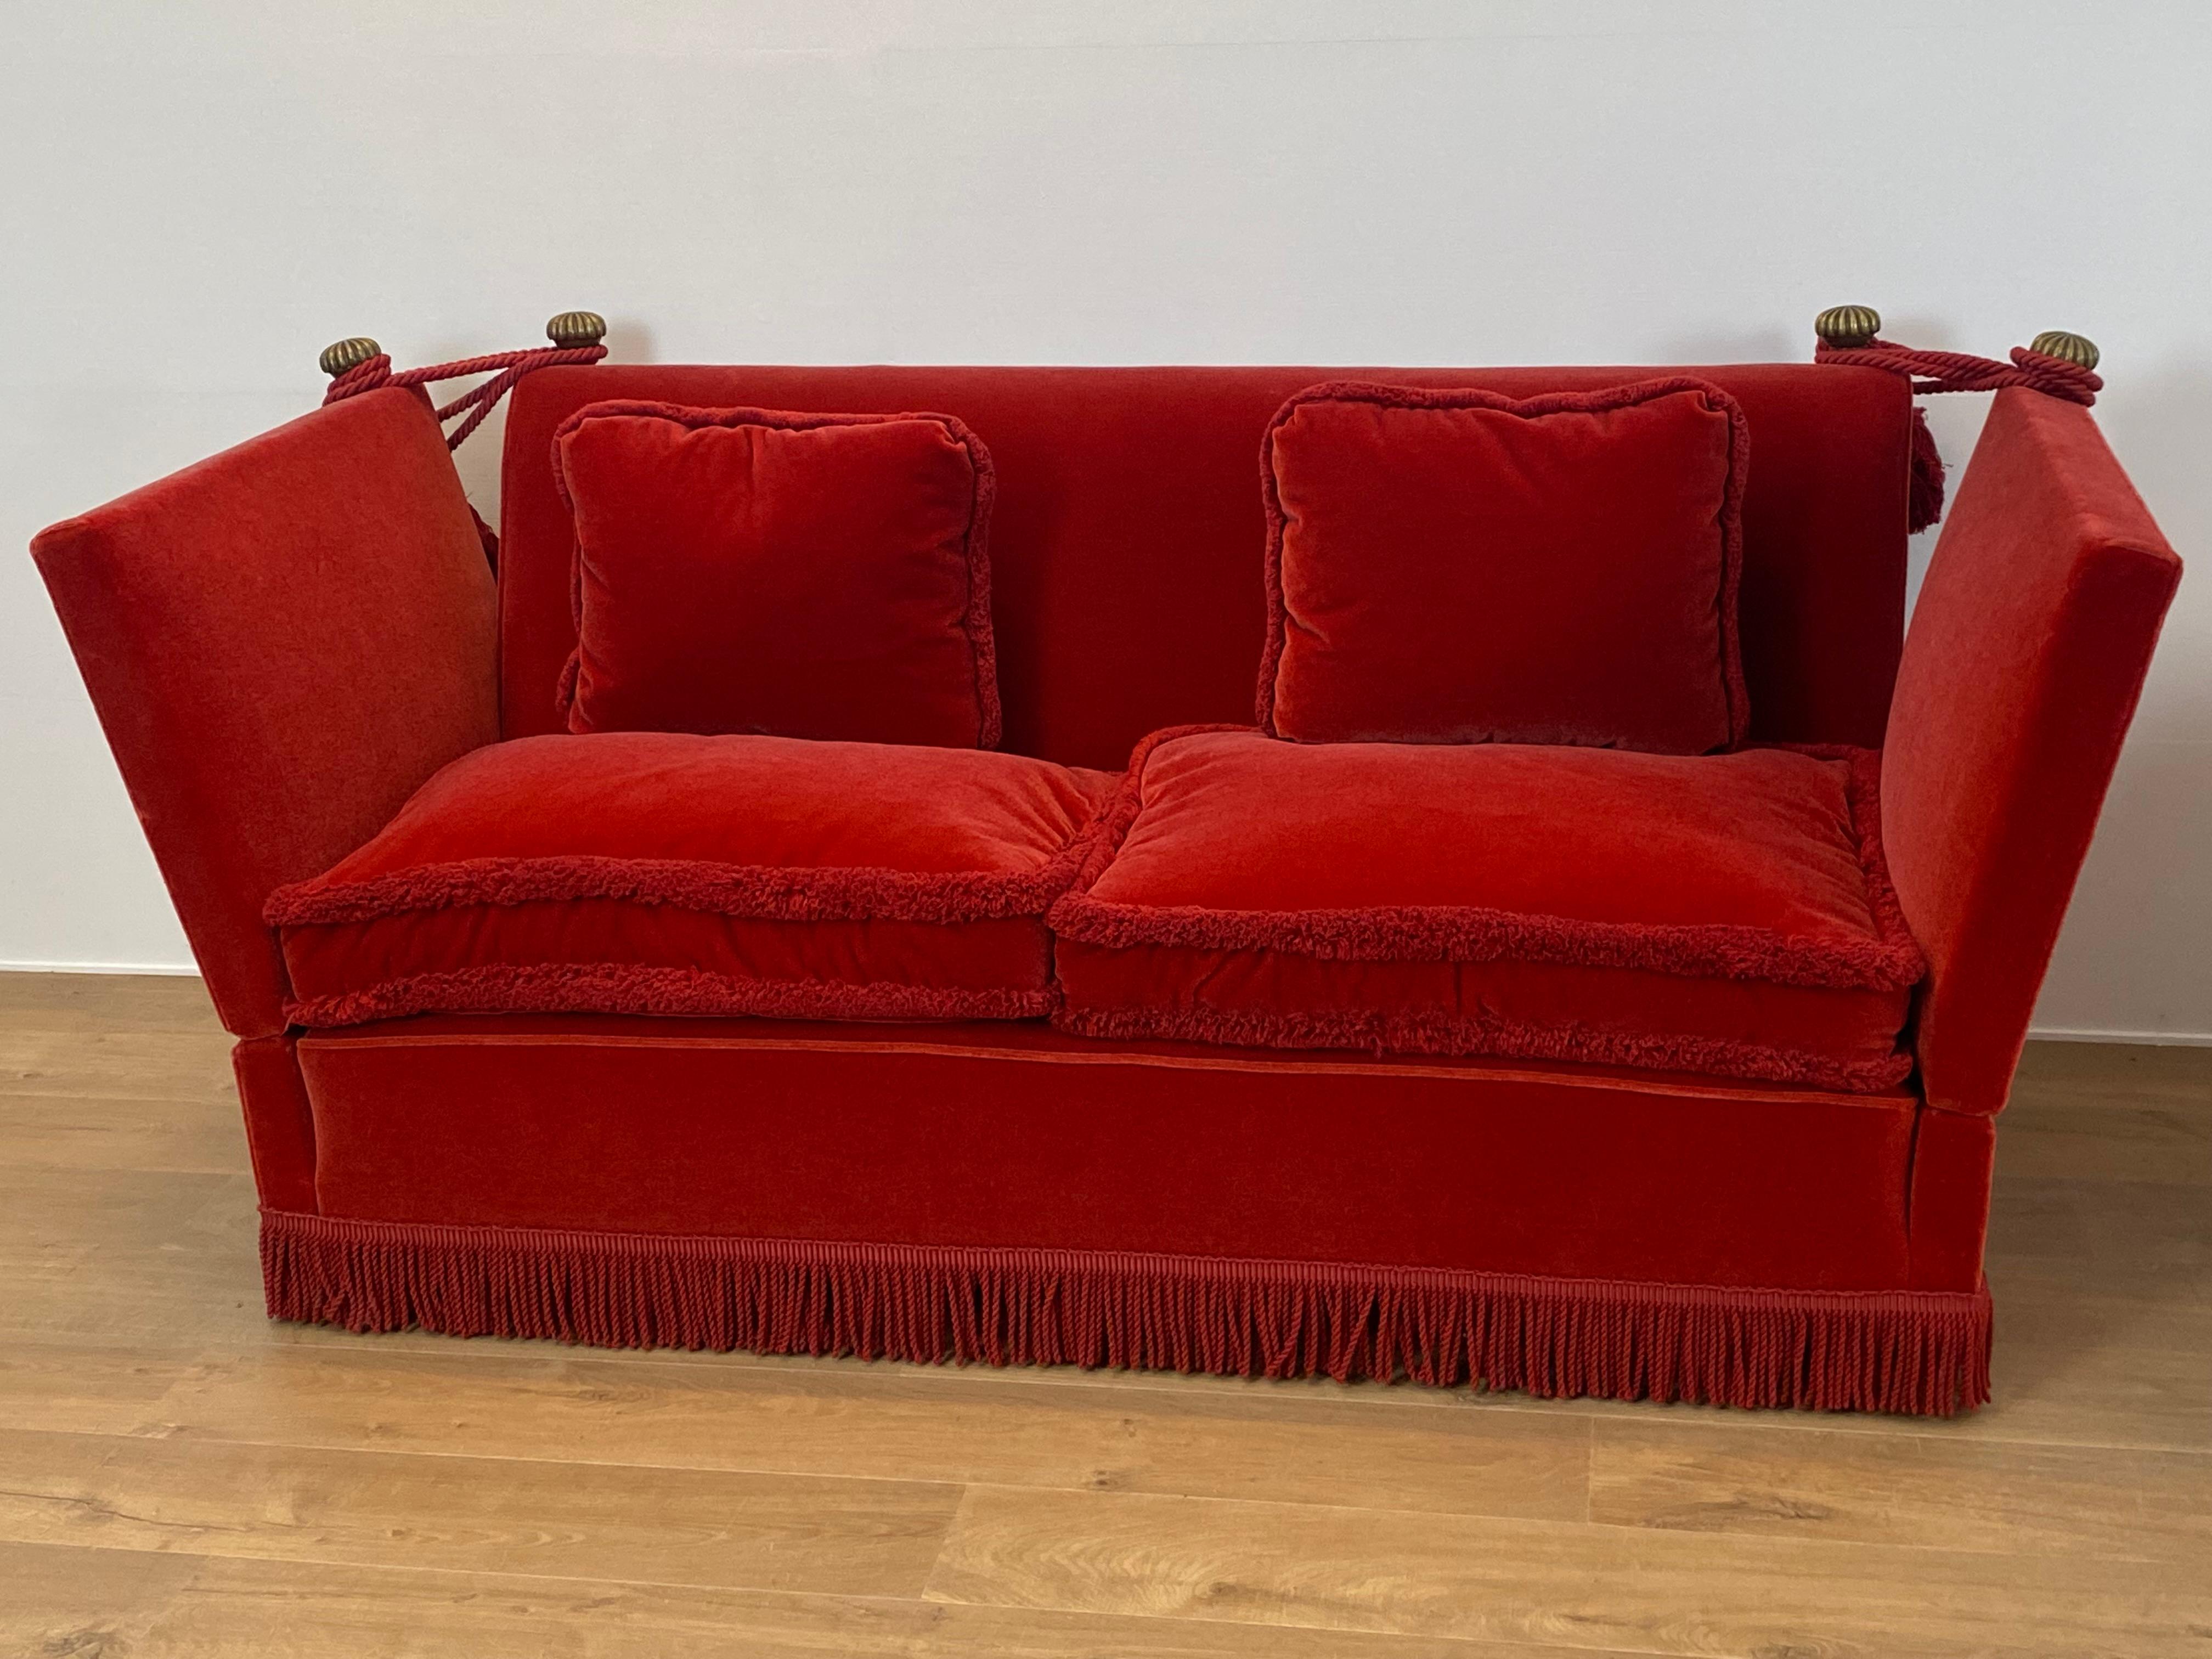 English Drop Arm Knoll Style Sofa in an Orange-Red Velvet For Sale